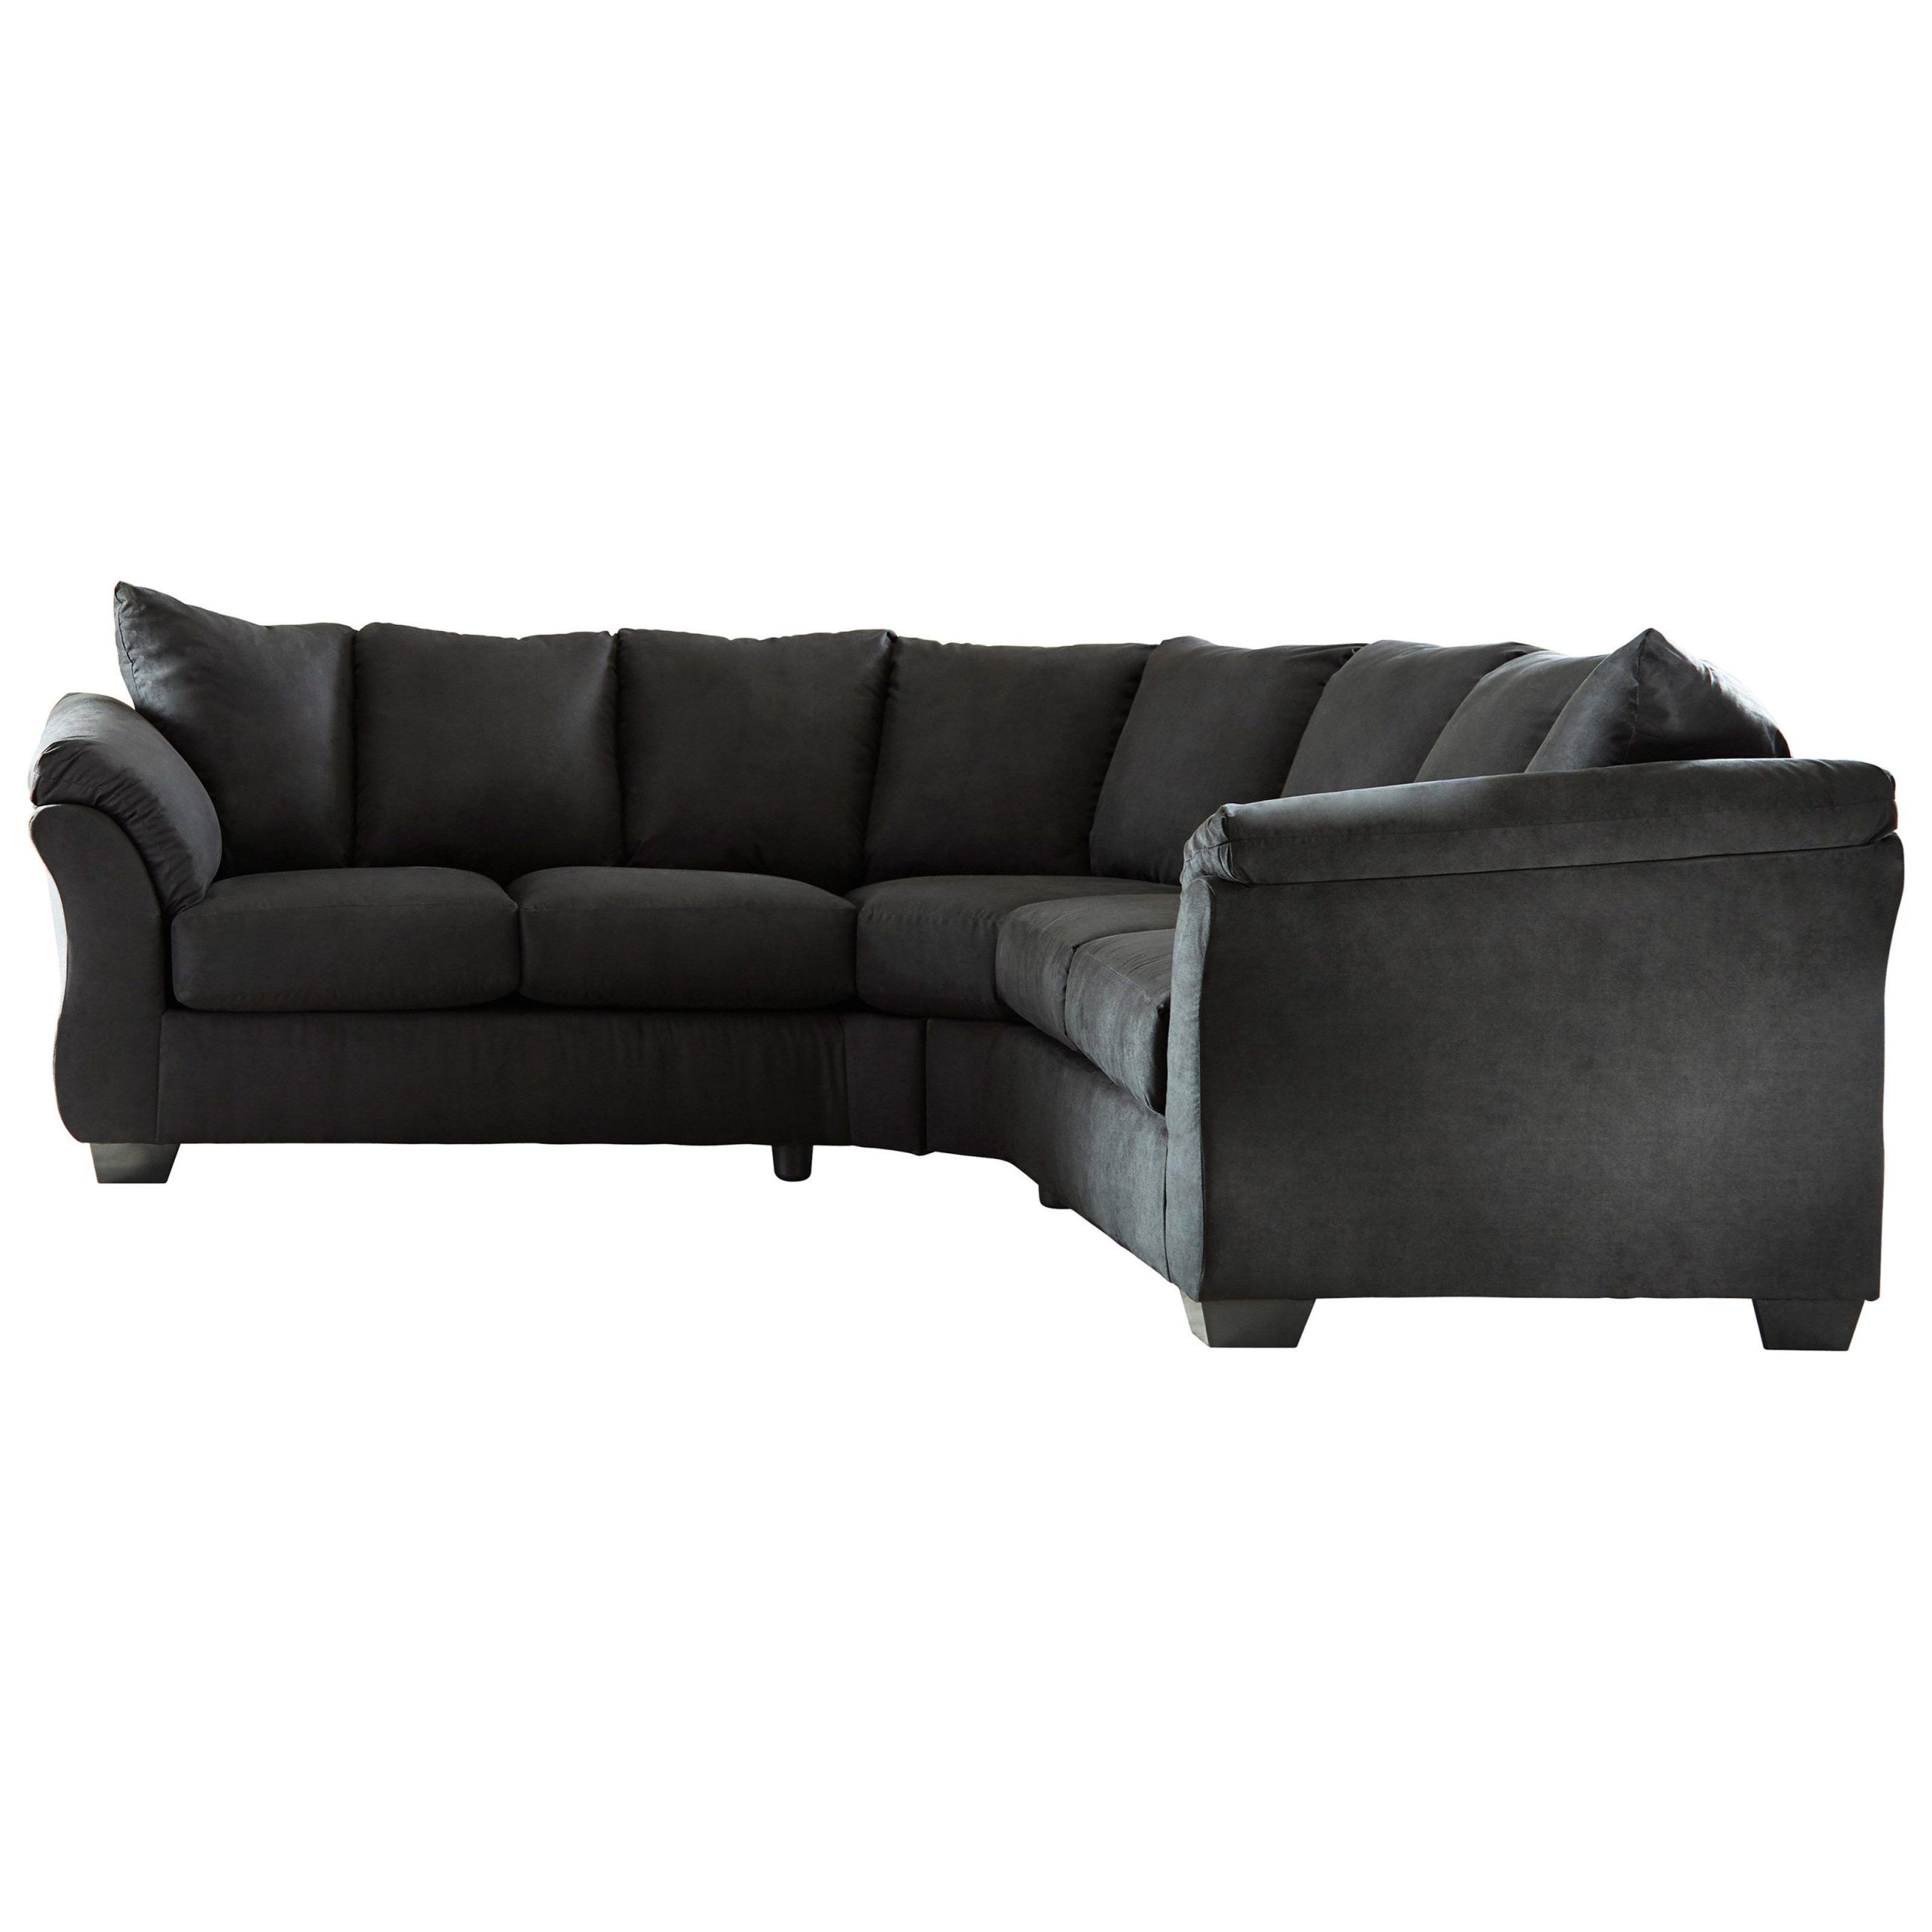 Contemporary Sectional Sofa With Sweeping Pillow Arms 104" X 104" Black Within 104" Sectional Sofas (Photo 5 of 15)